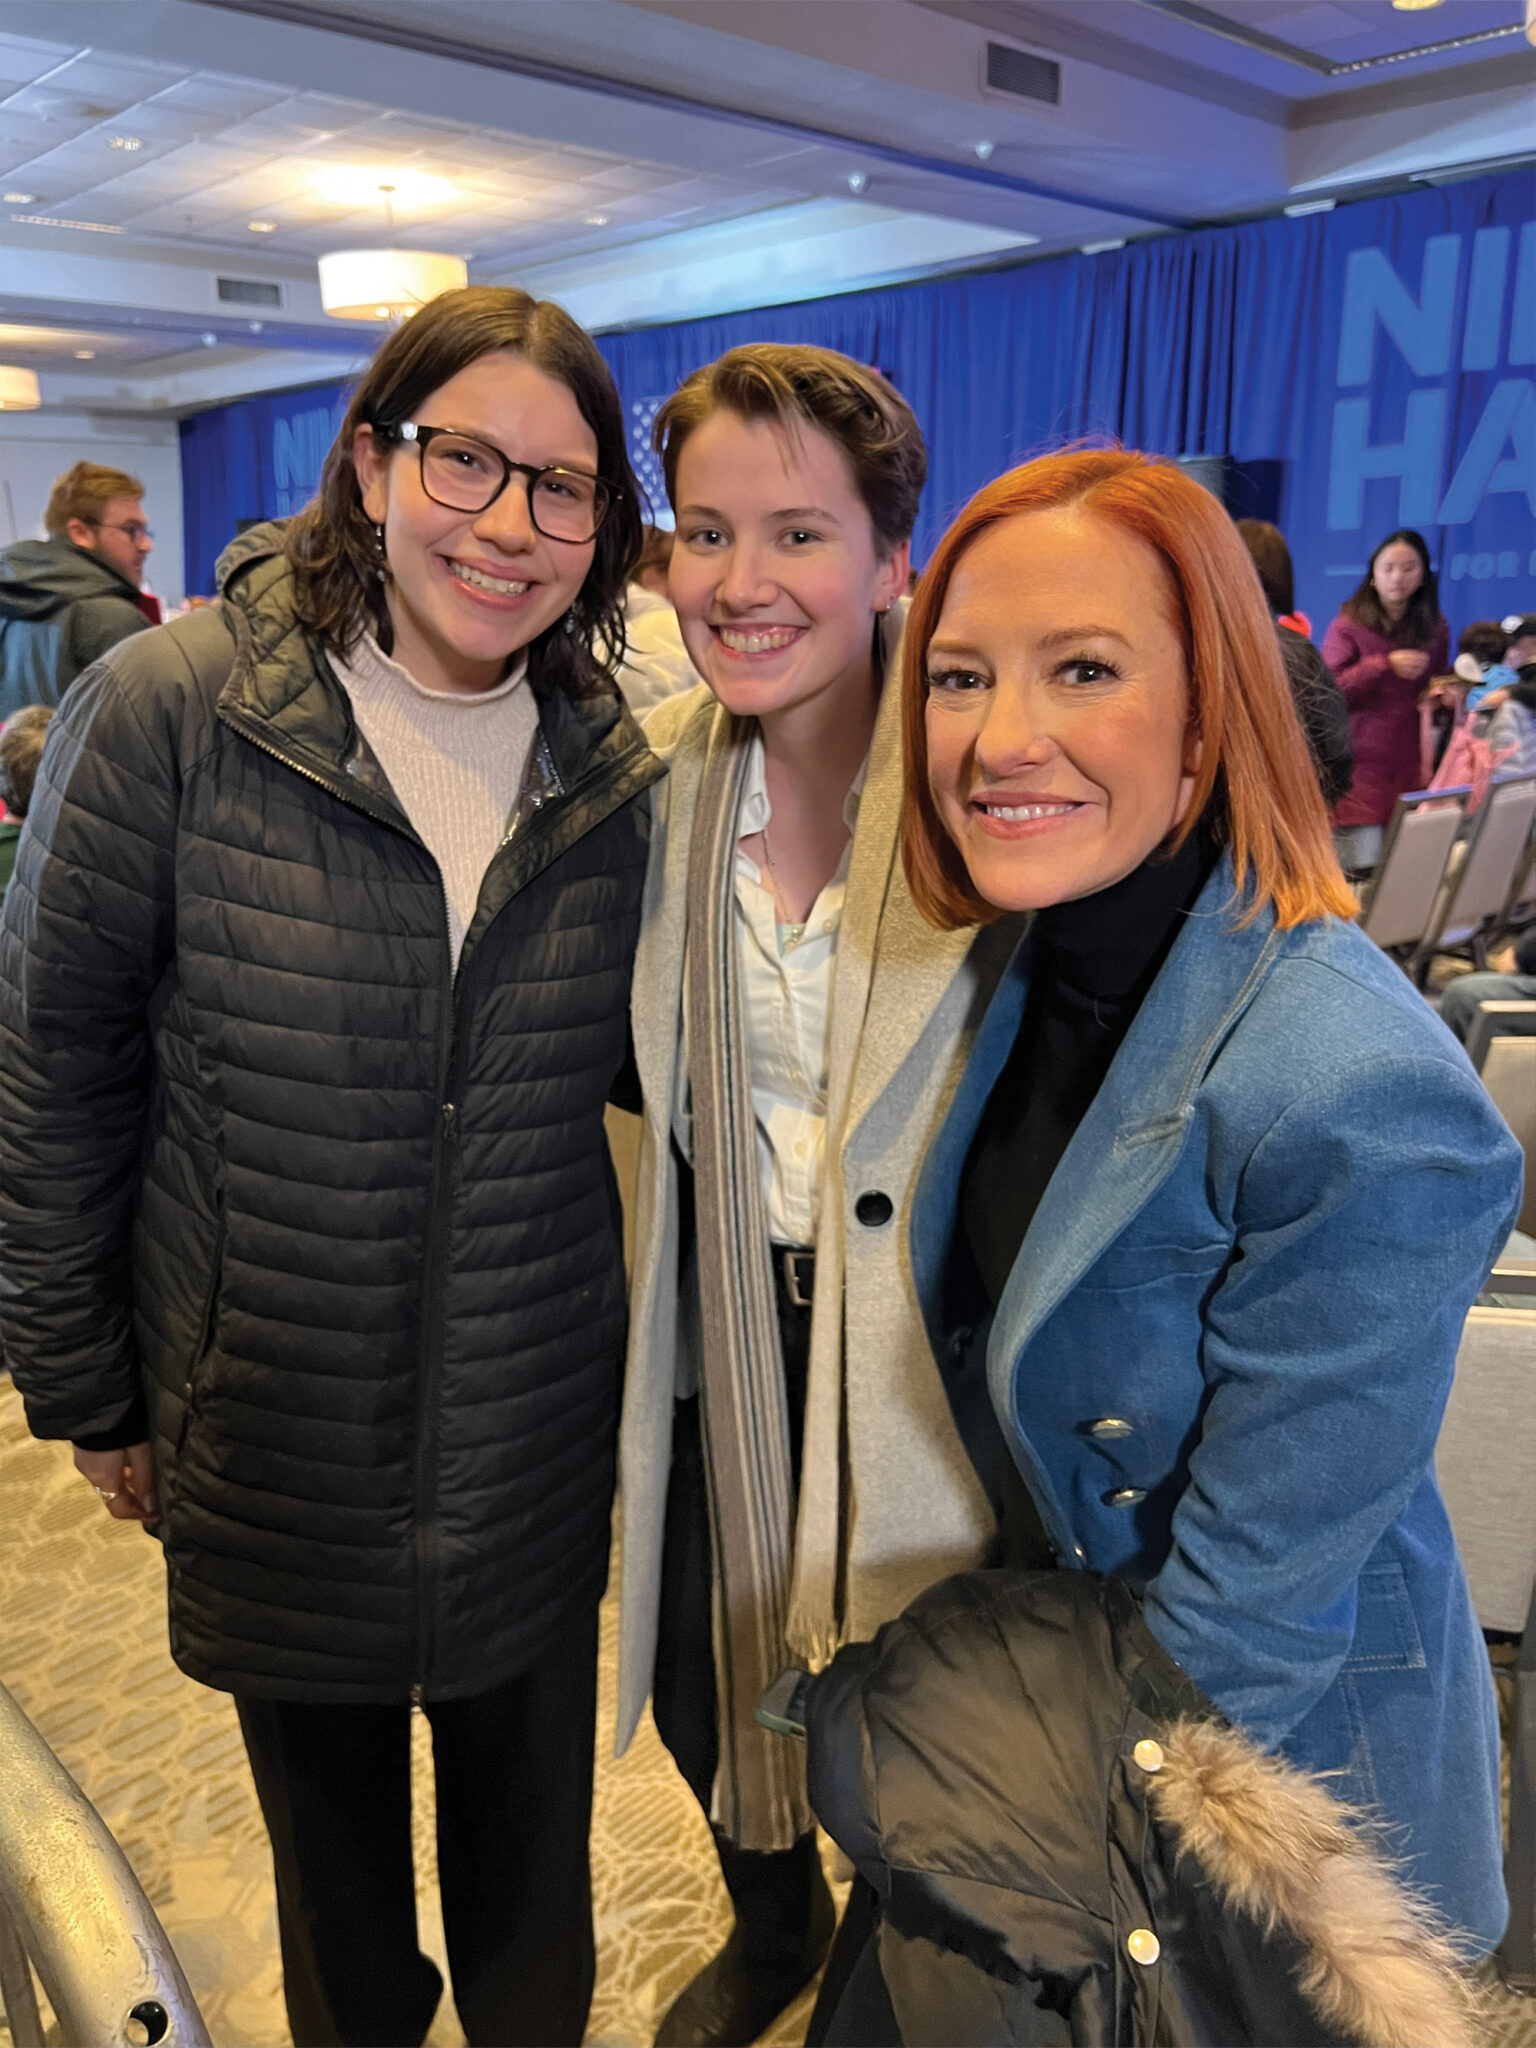 Magazine, news and digital journalism sophomore Danielle Blyn (left) and senior Eden Stratton (center) meet MSNBC host and former White House press secretary Jen Psaki while covering a Nikki Haley rally in Nashua, N.H.